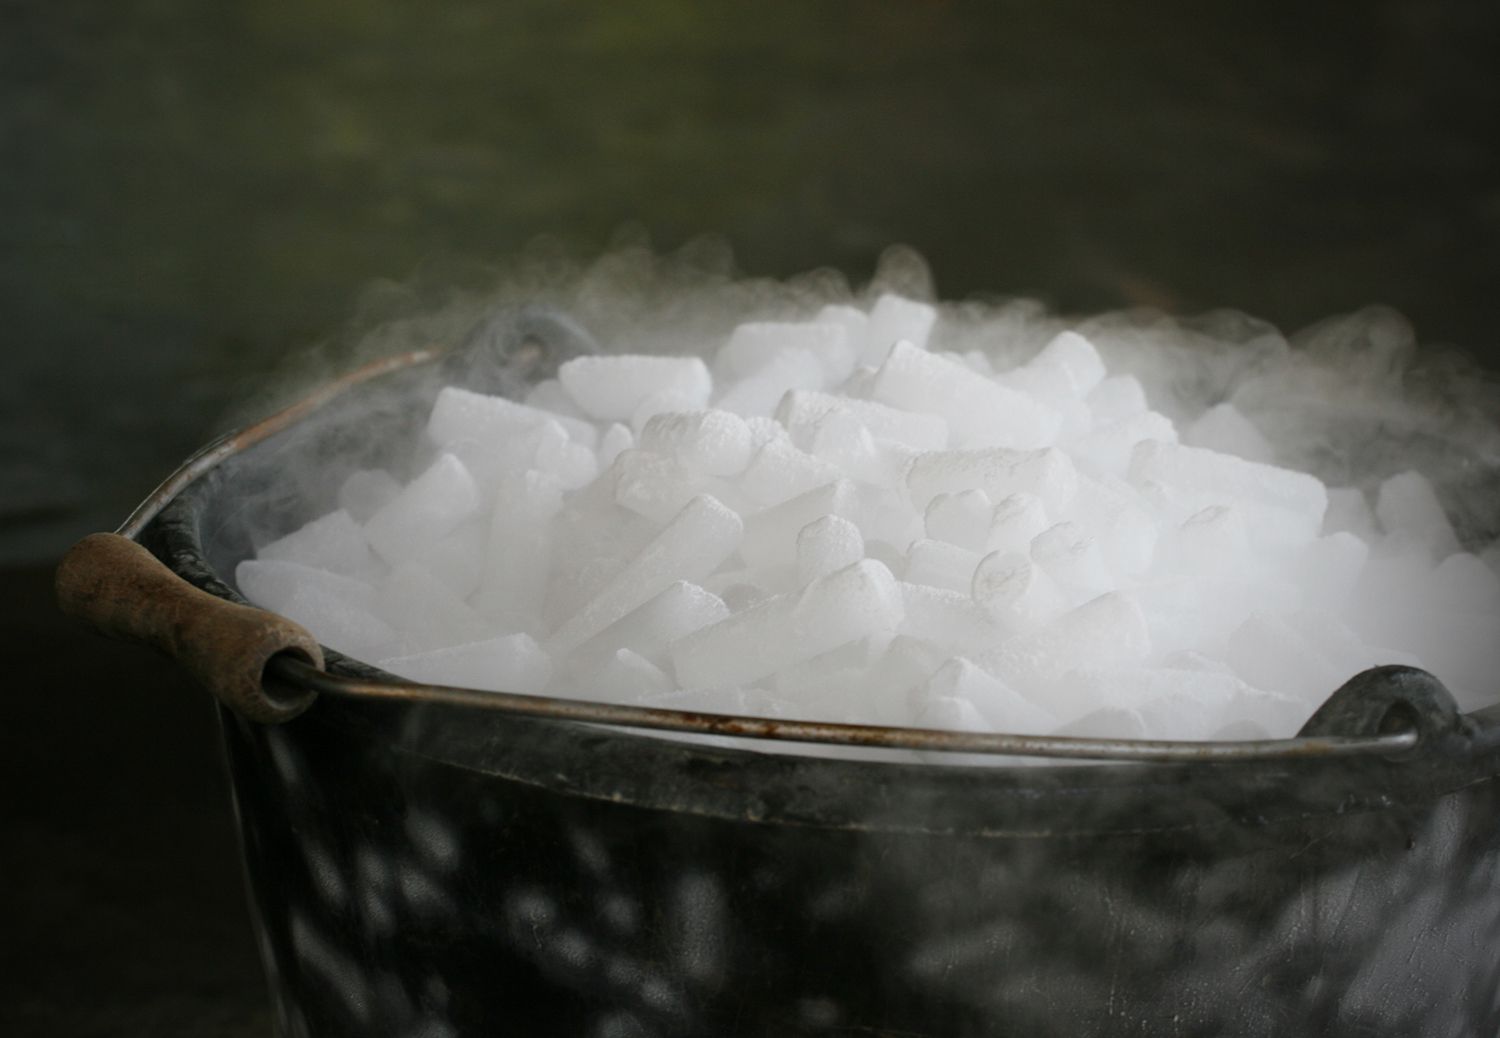 19-fun-facts-about-dry-ice